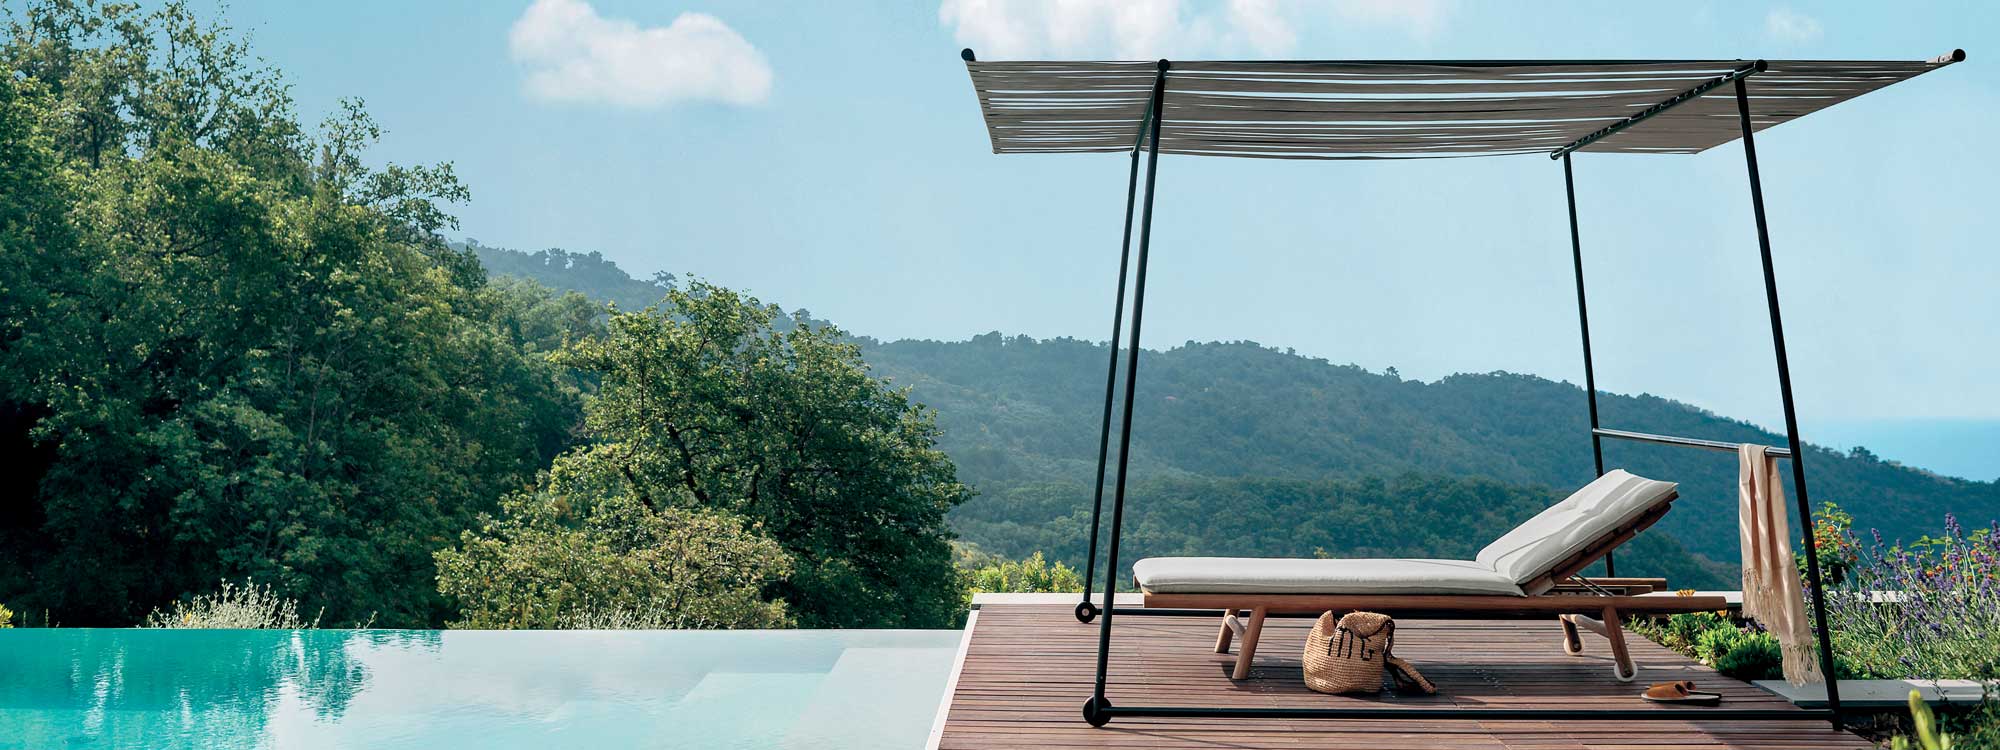 Image of RODA Ombrina minimalist pergola and Orson teak sun lounger, shown on horizon poolside with Italian hills and woodland in background